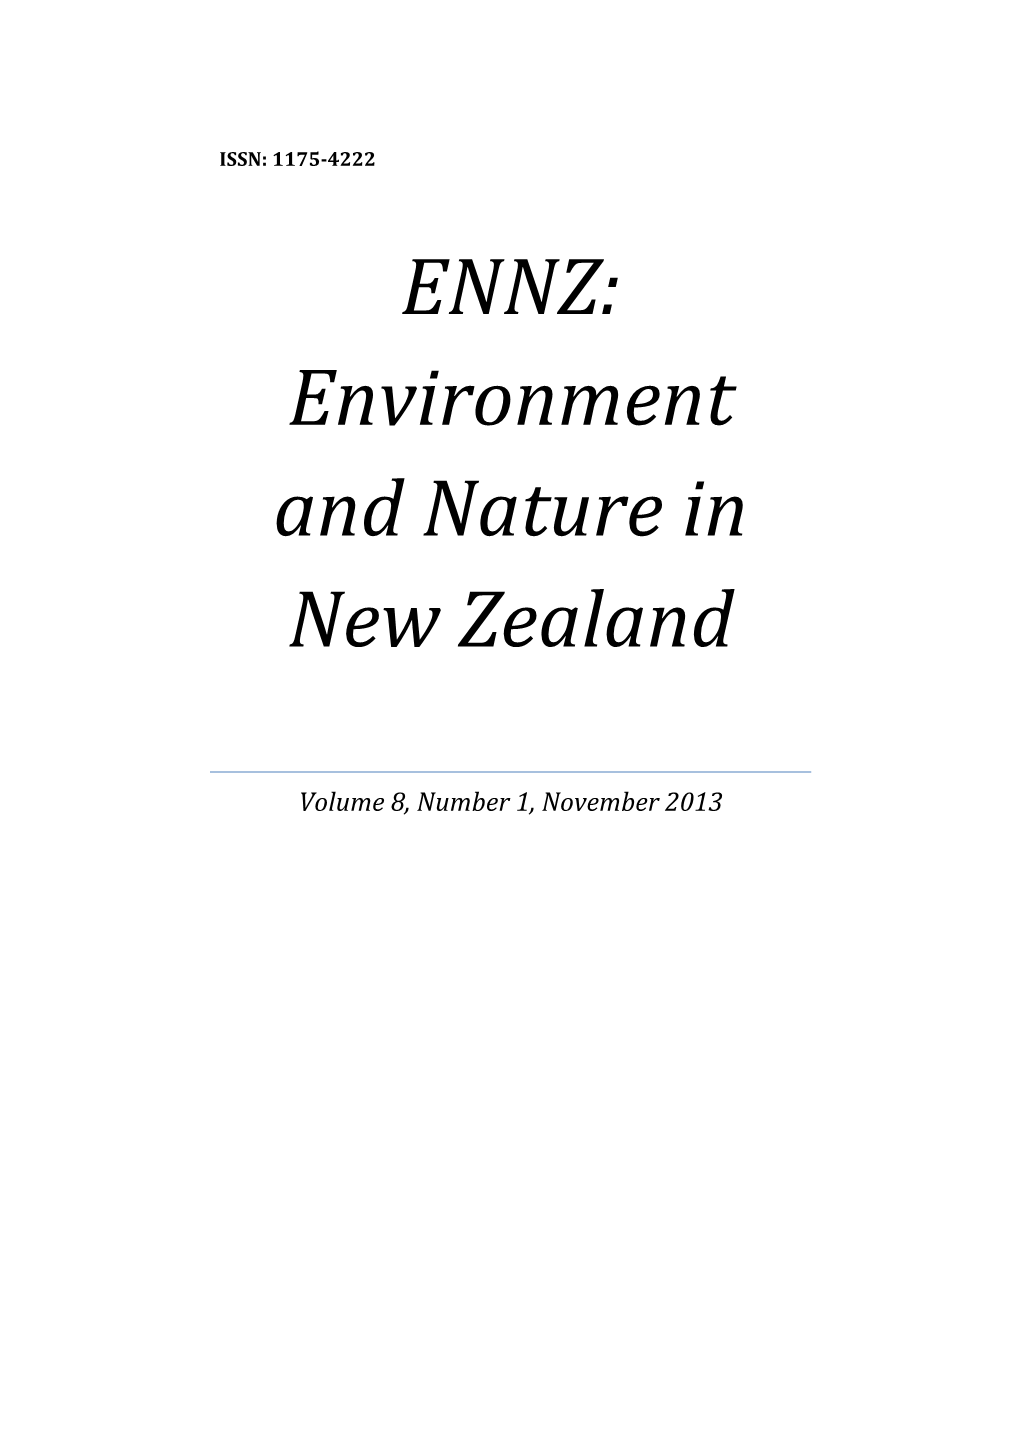 ENNZ: Environment and Nature in New Zealand